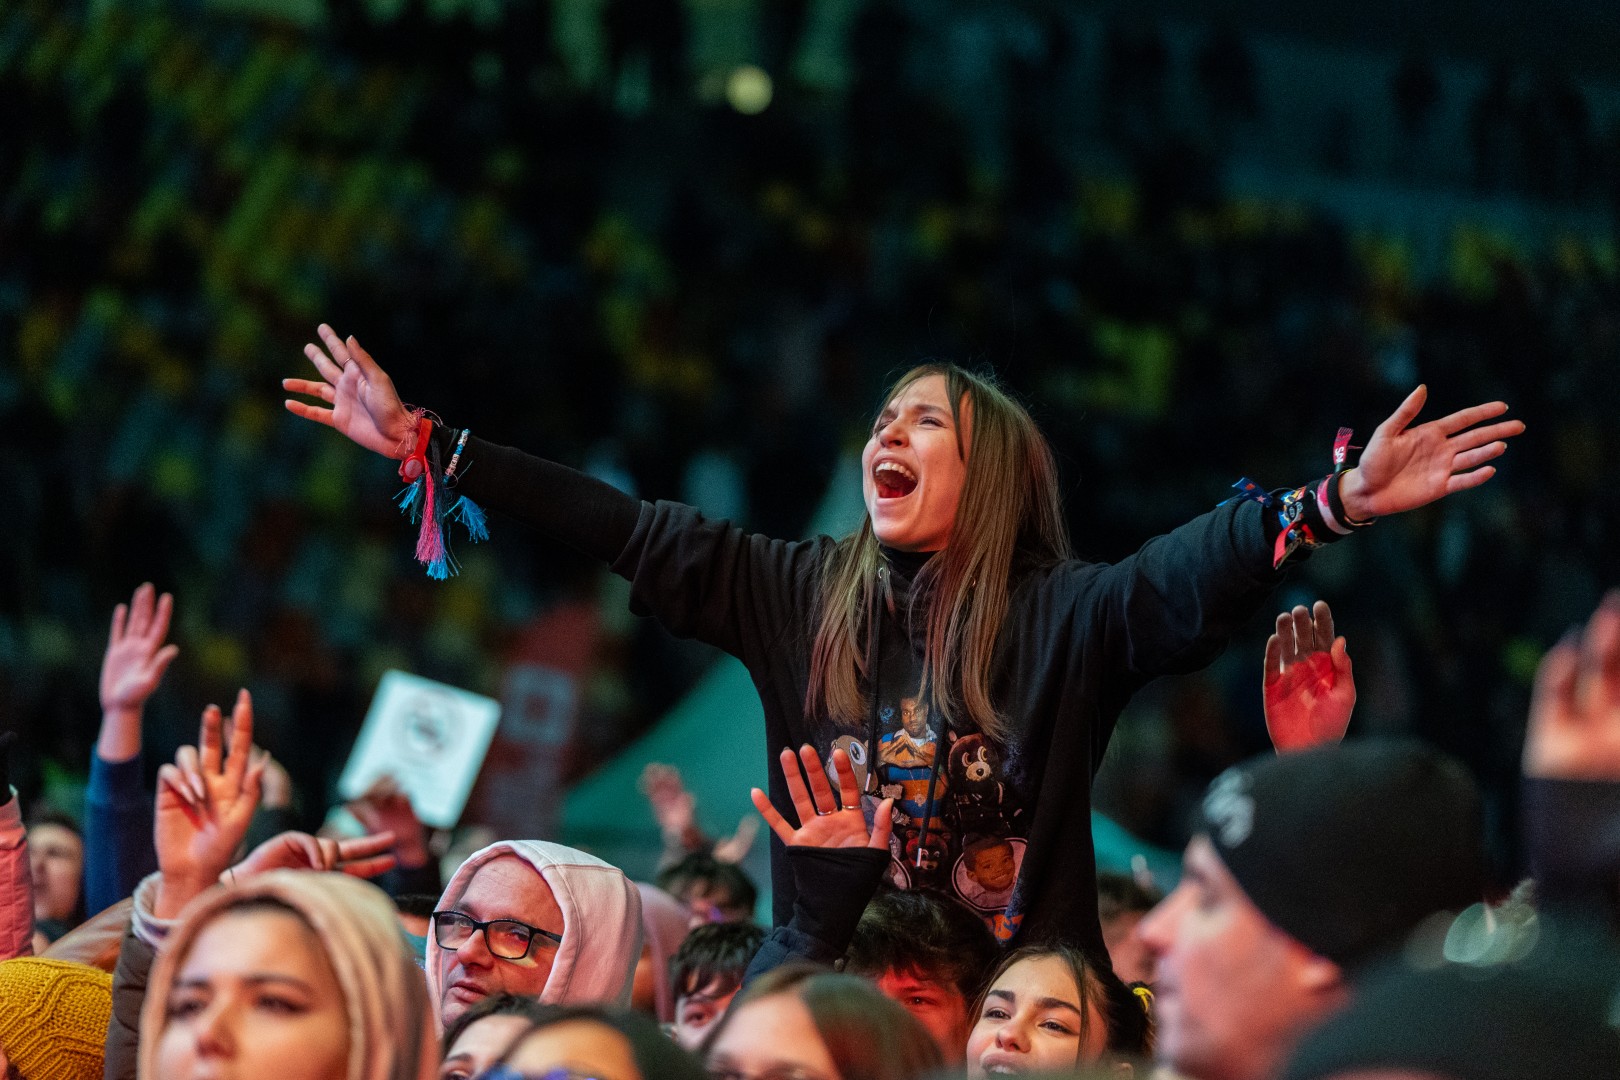 Public at National Arena in Bucharest on March 12, 2022 (ee31cf3f06)